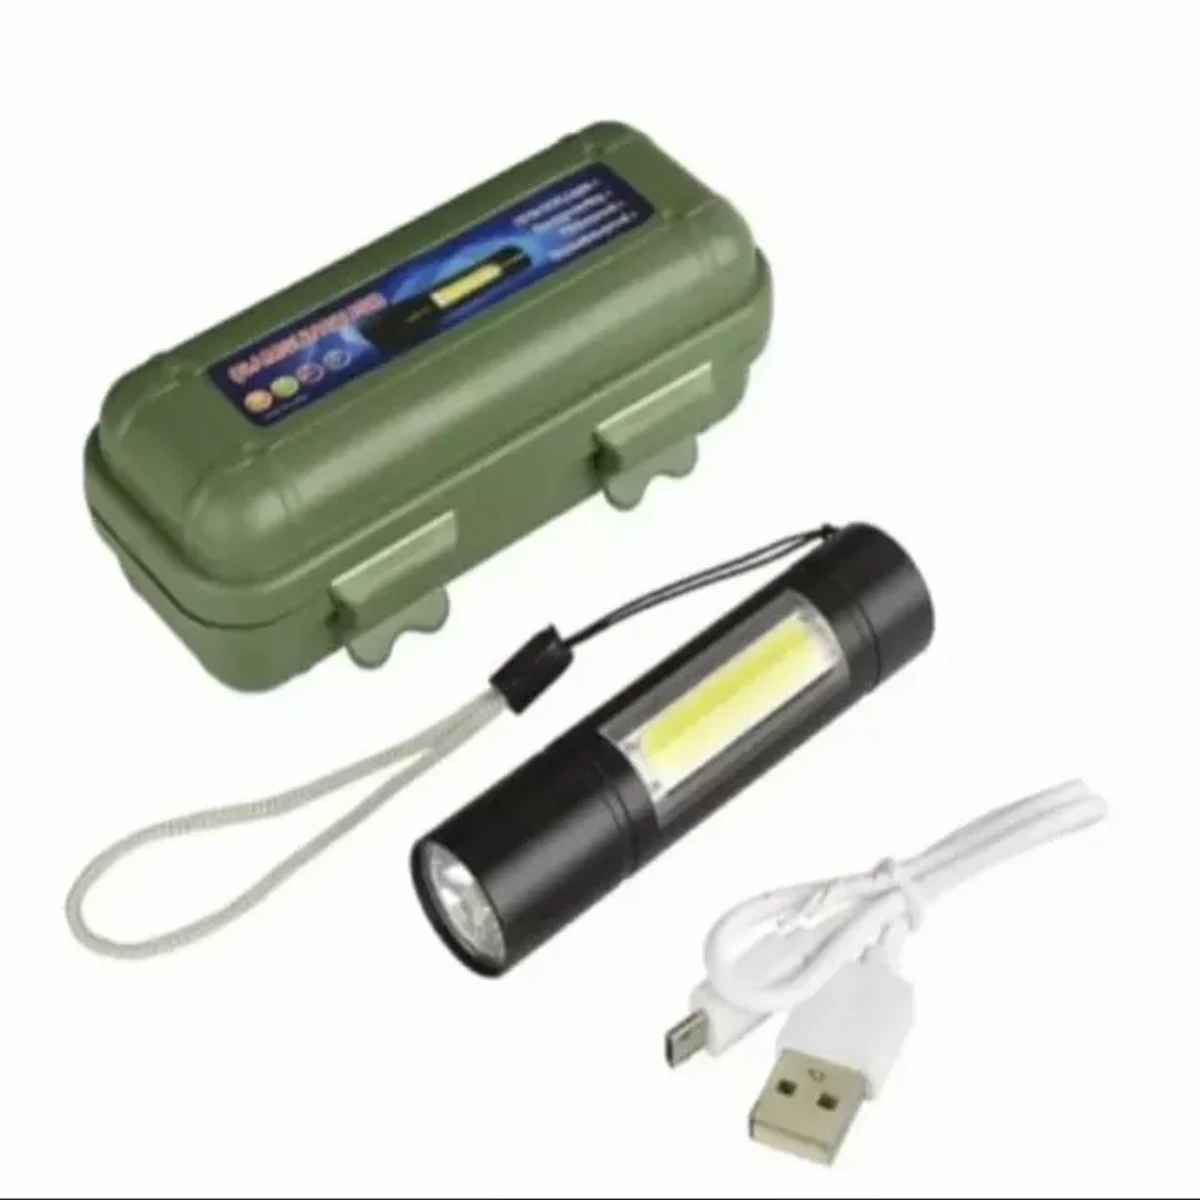 Rechargeable Flashlights Torch Led Usb Portable Torches 3 Modes Mini Camping Lighting